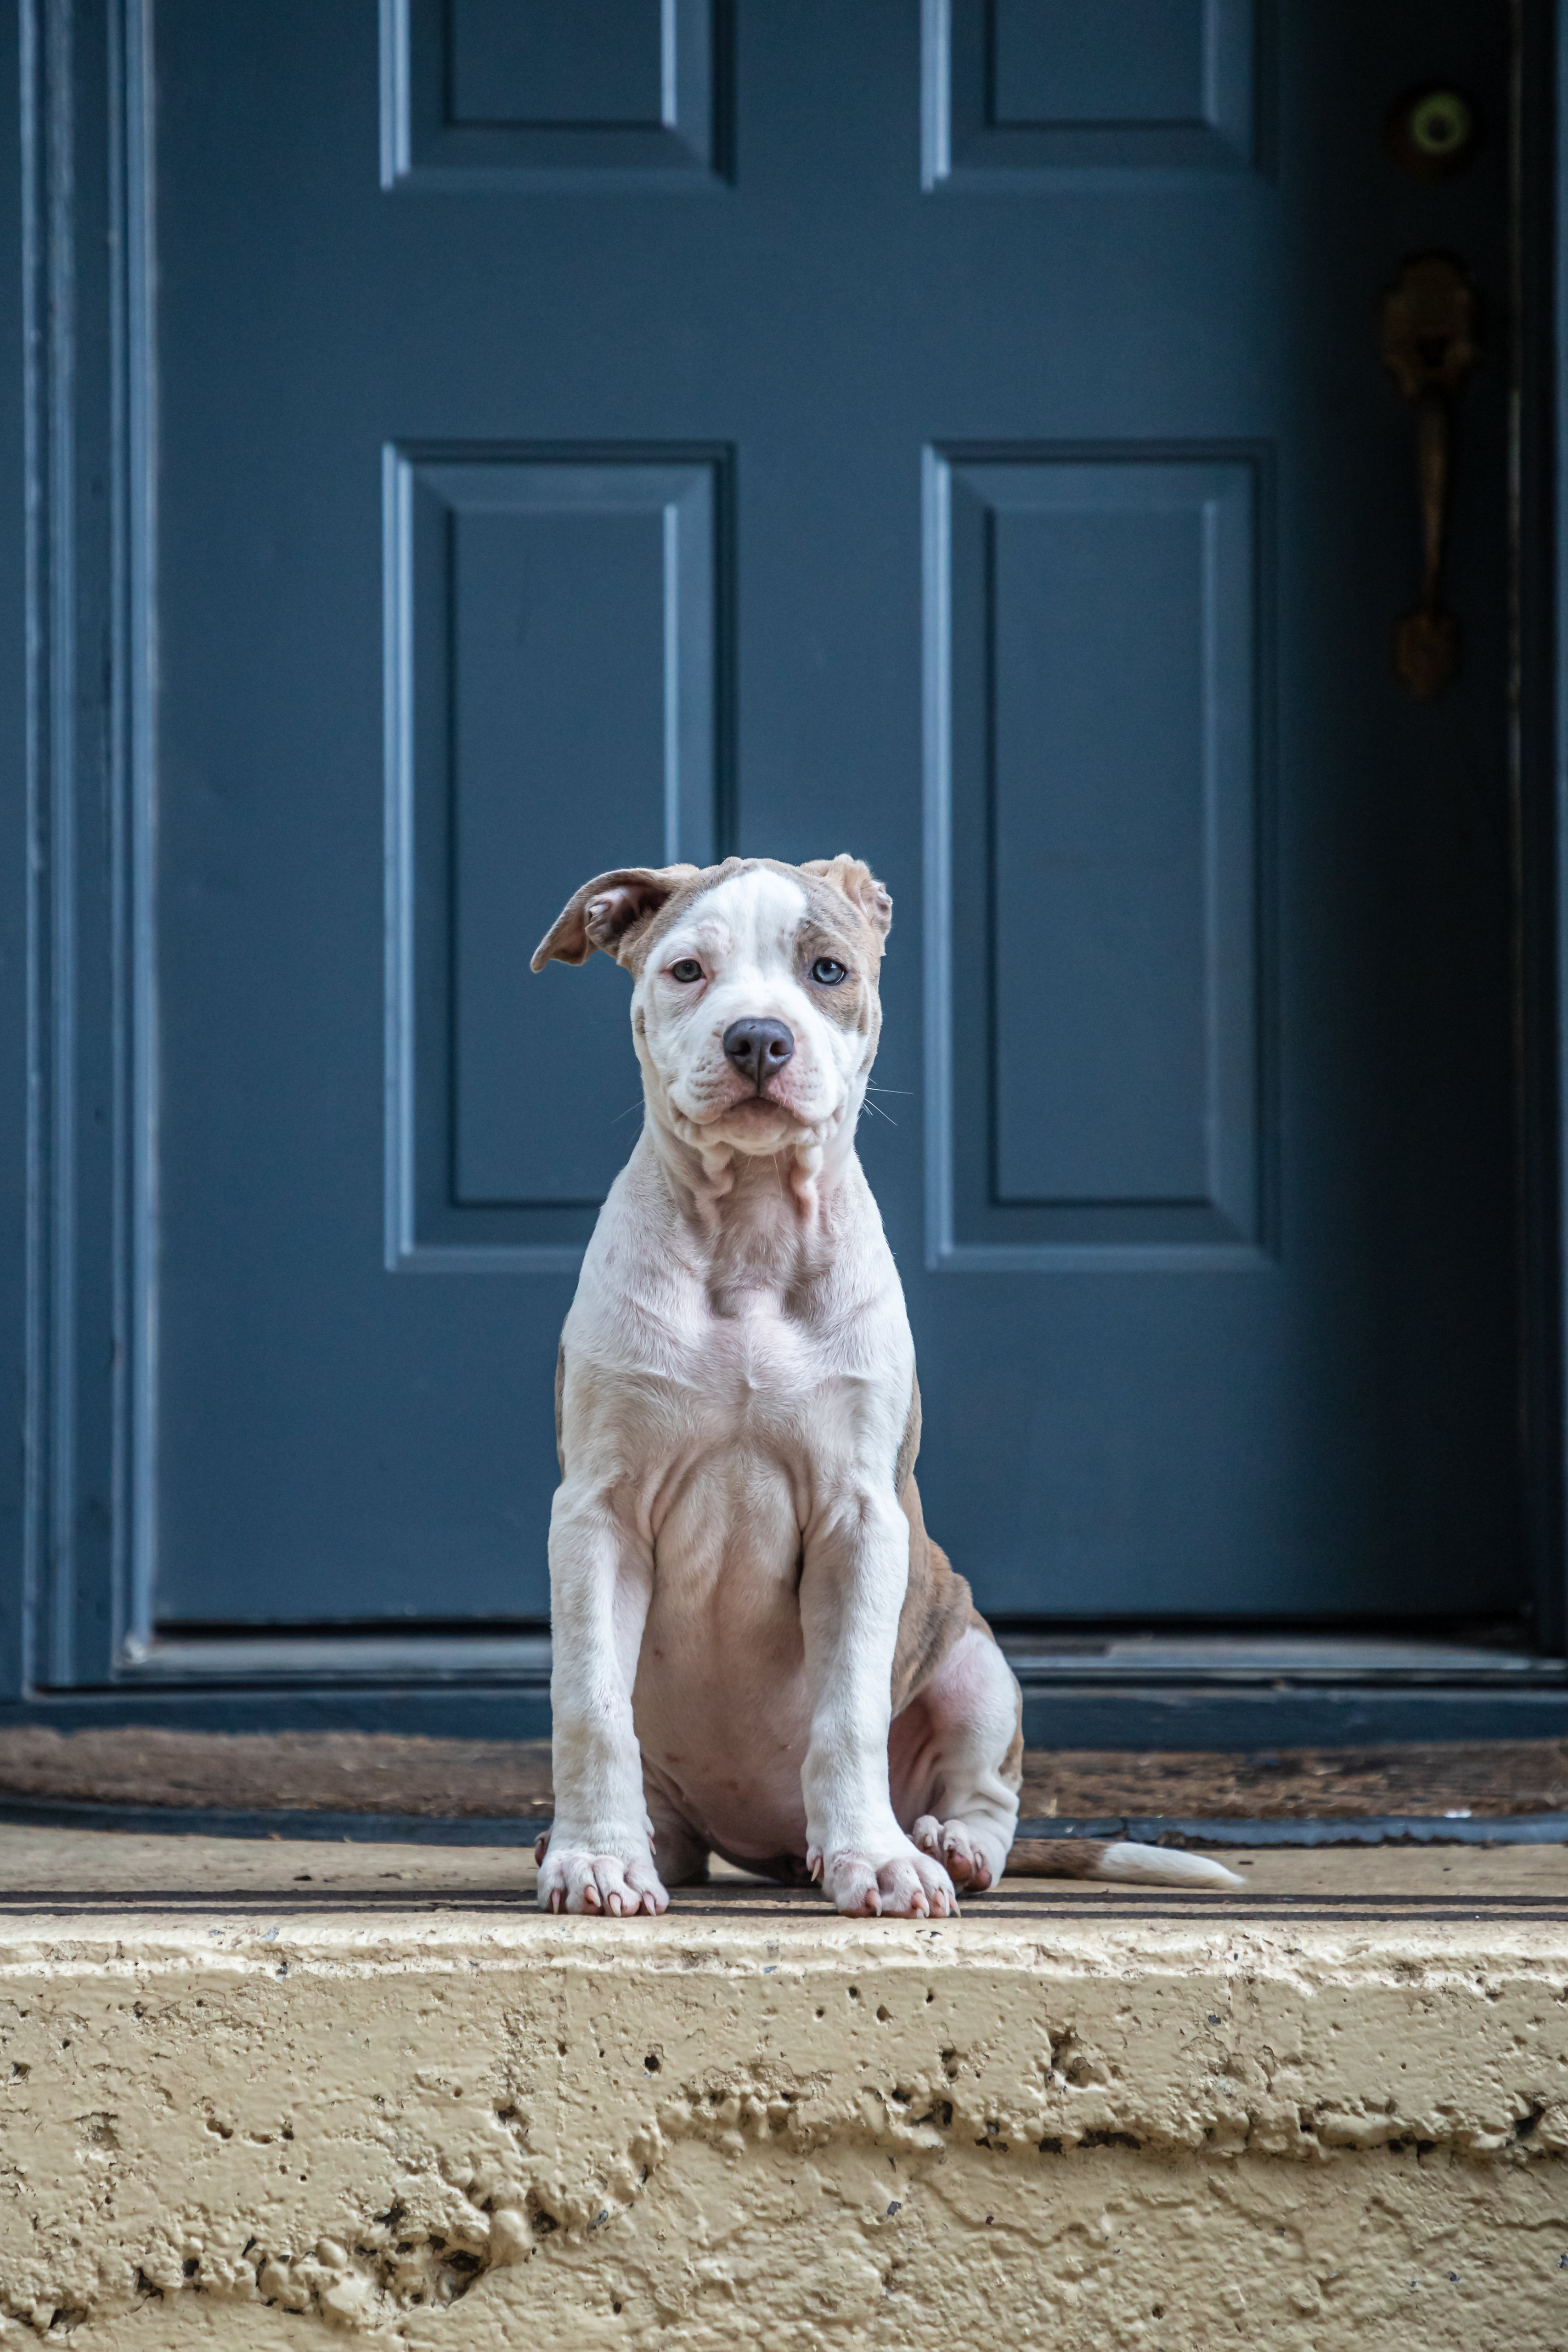 Latest Mobile Wallpaper dog, opinion, door, sight